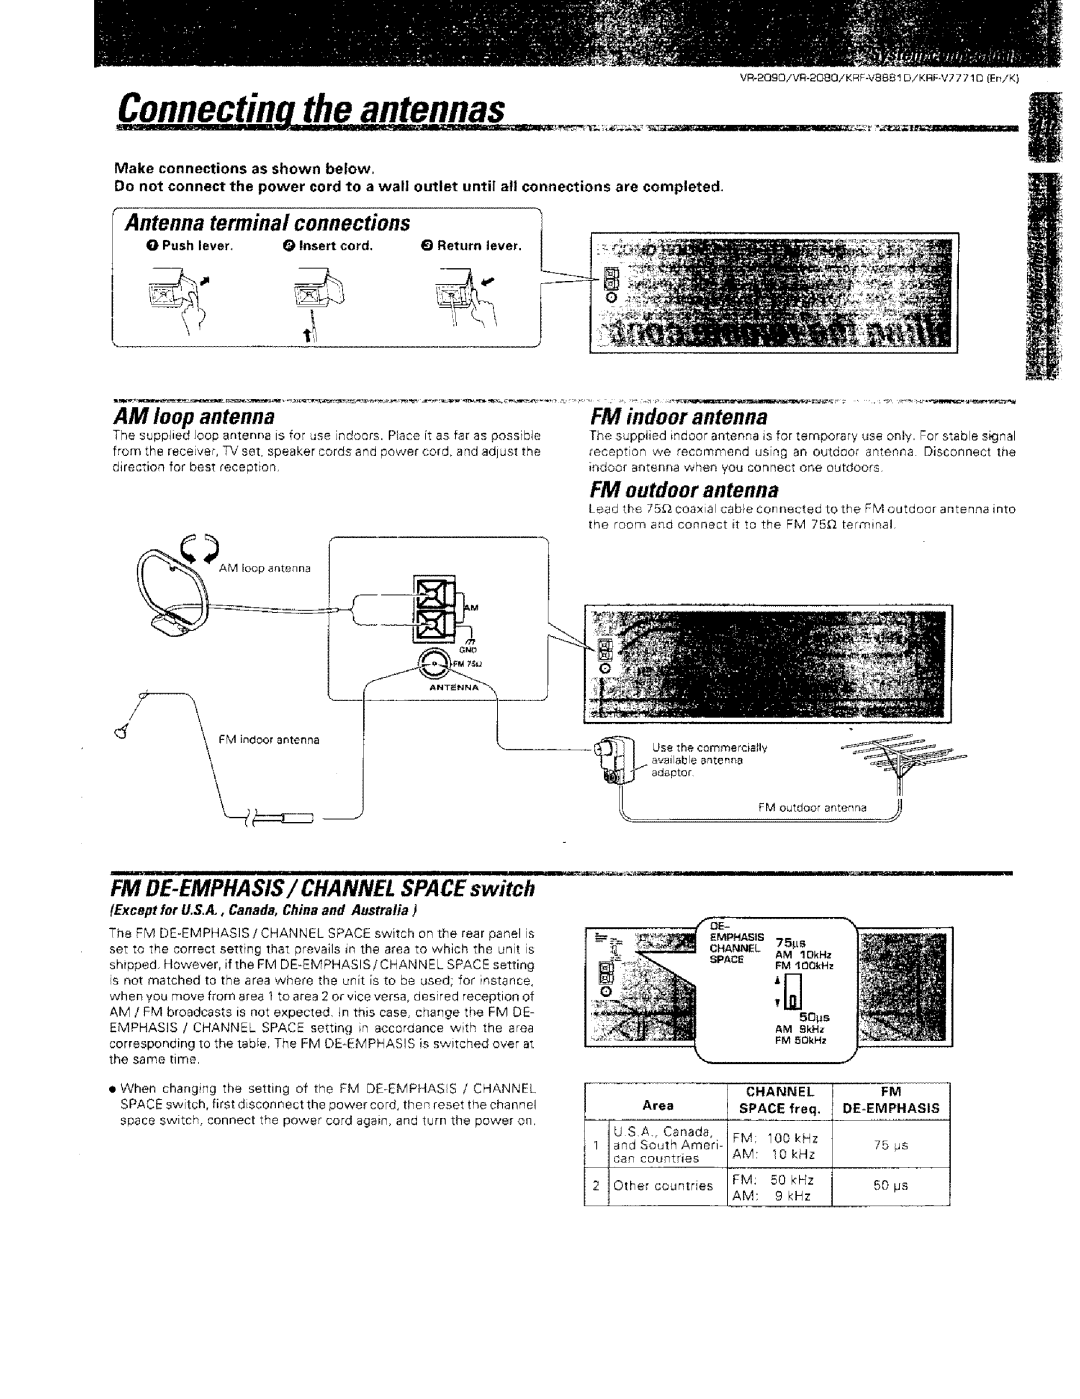 Kenwood VR-2000 Antenna terminal connections, AM loop antenna, FM indoor antenna, FM outdoor antenna, SPACE switch, 50ps 